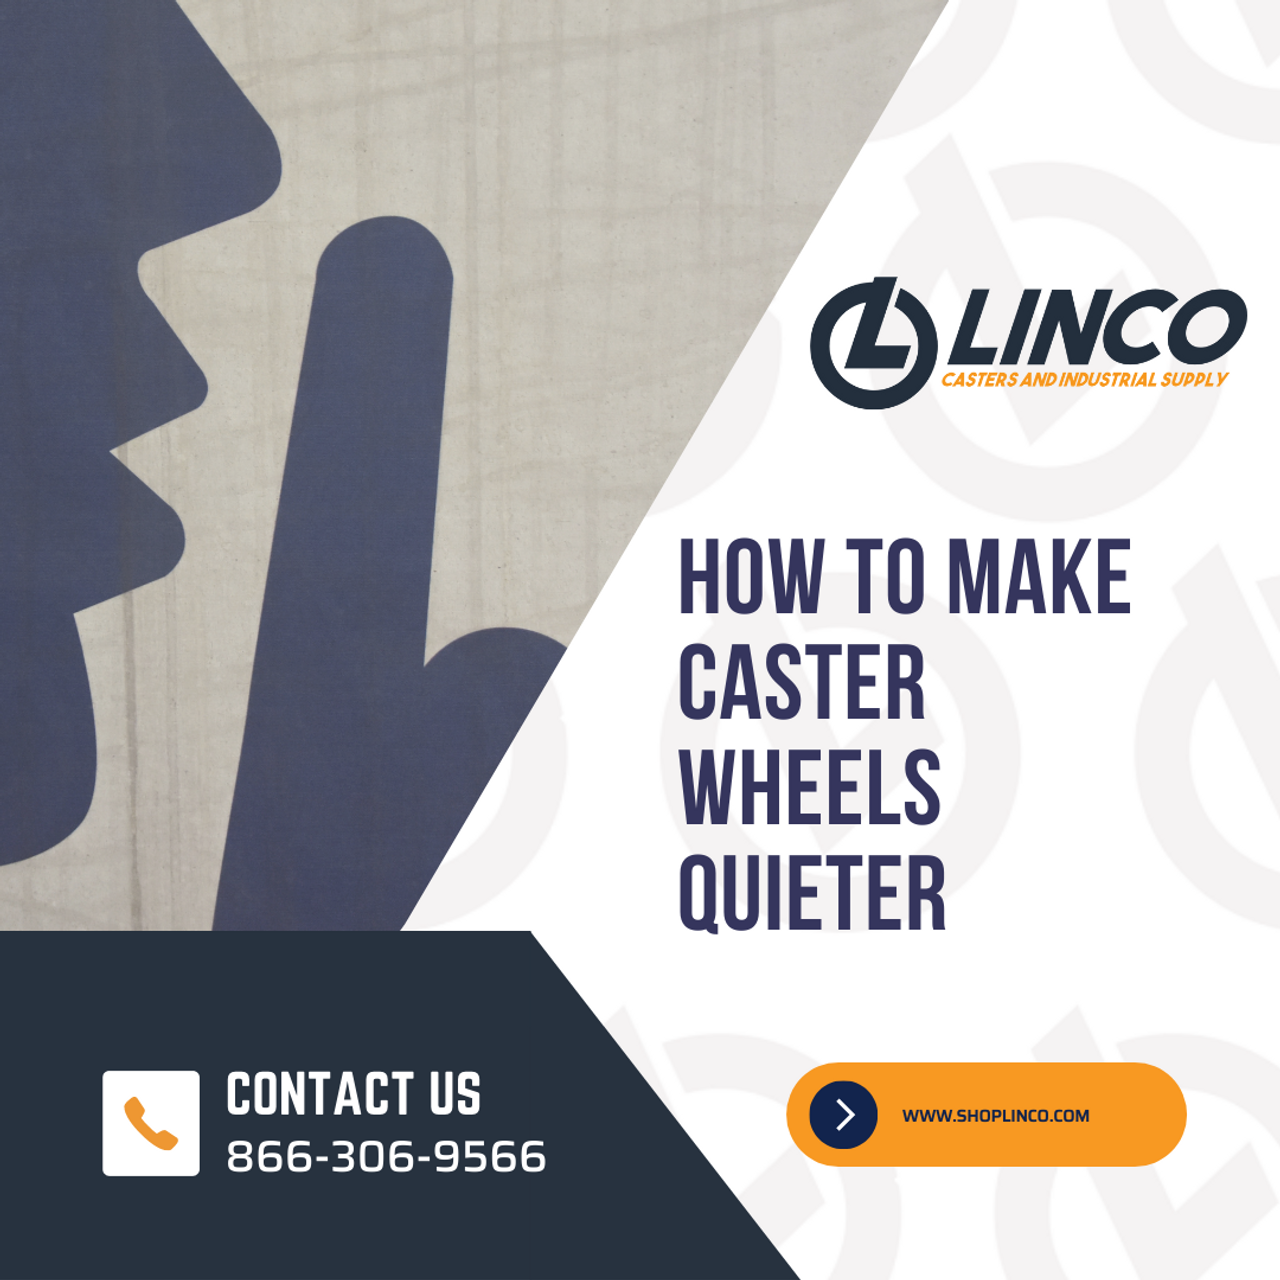 How To Make Caster Wheels Quieter